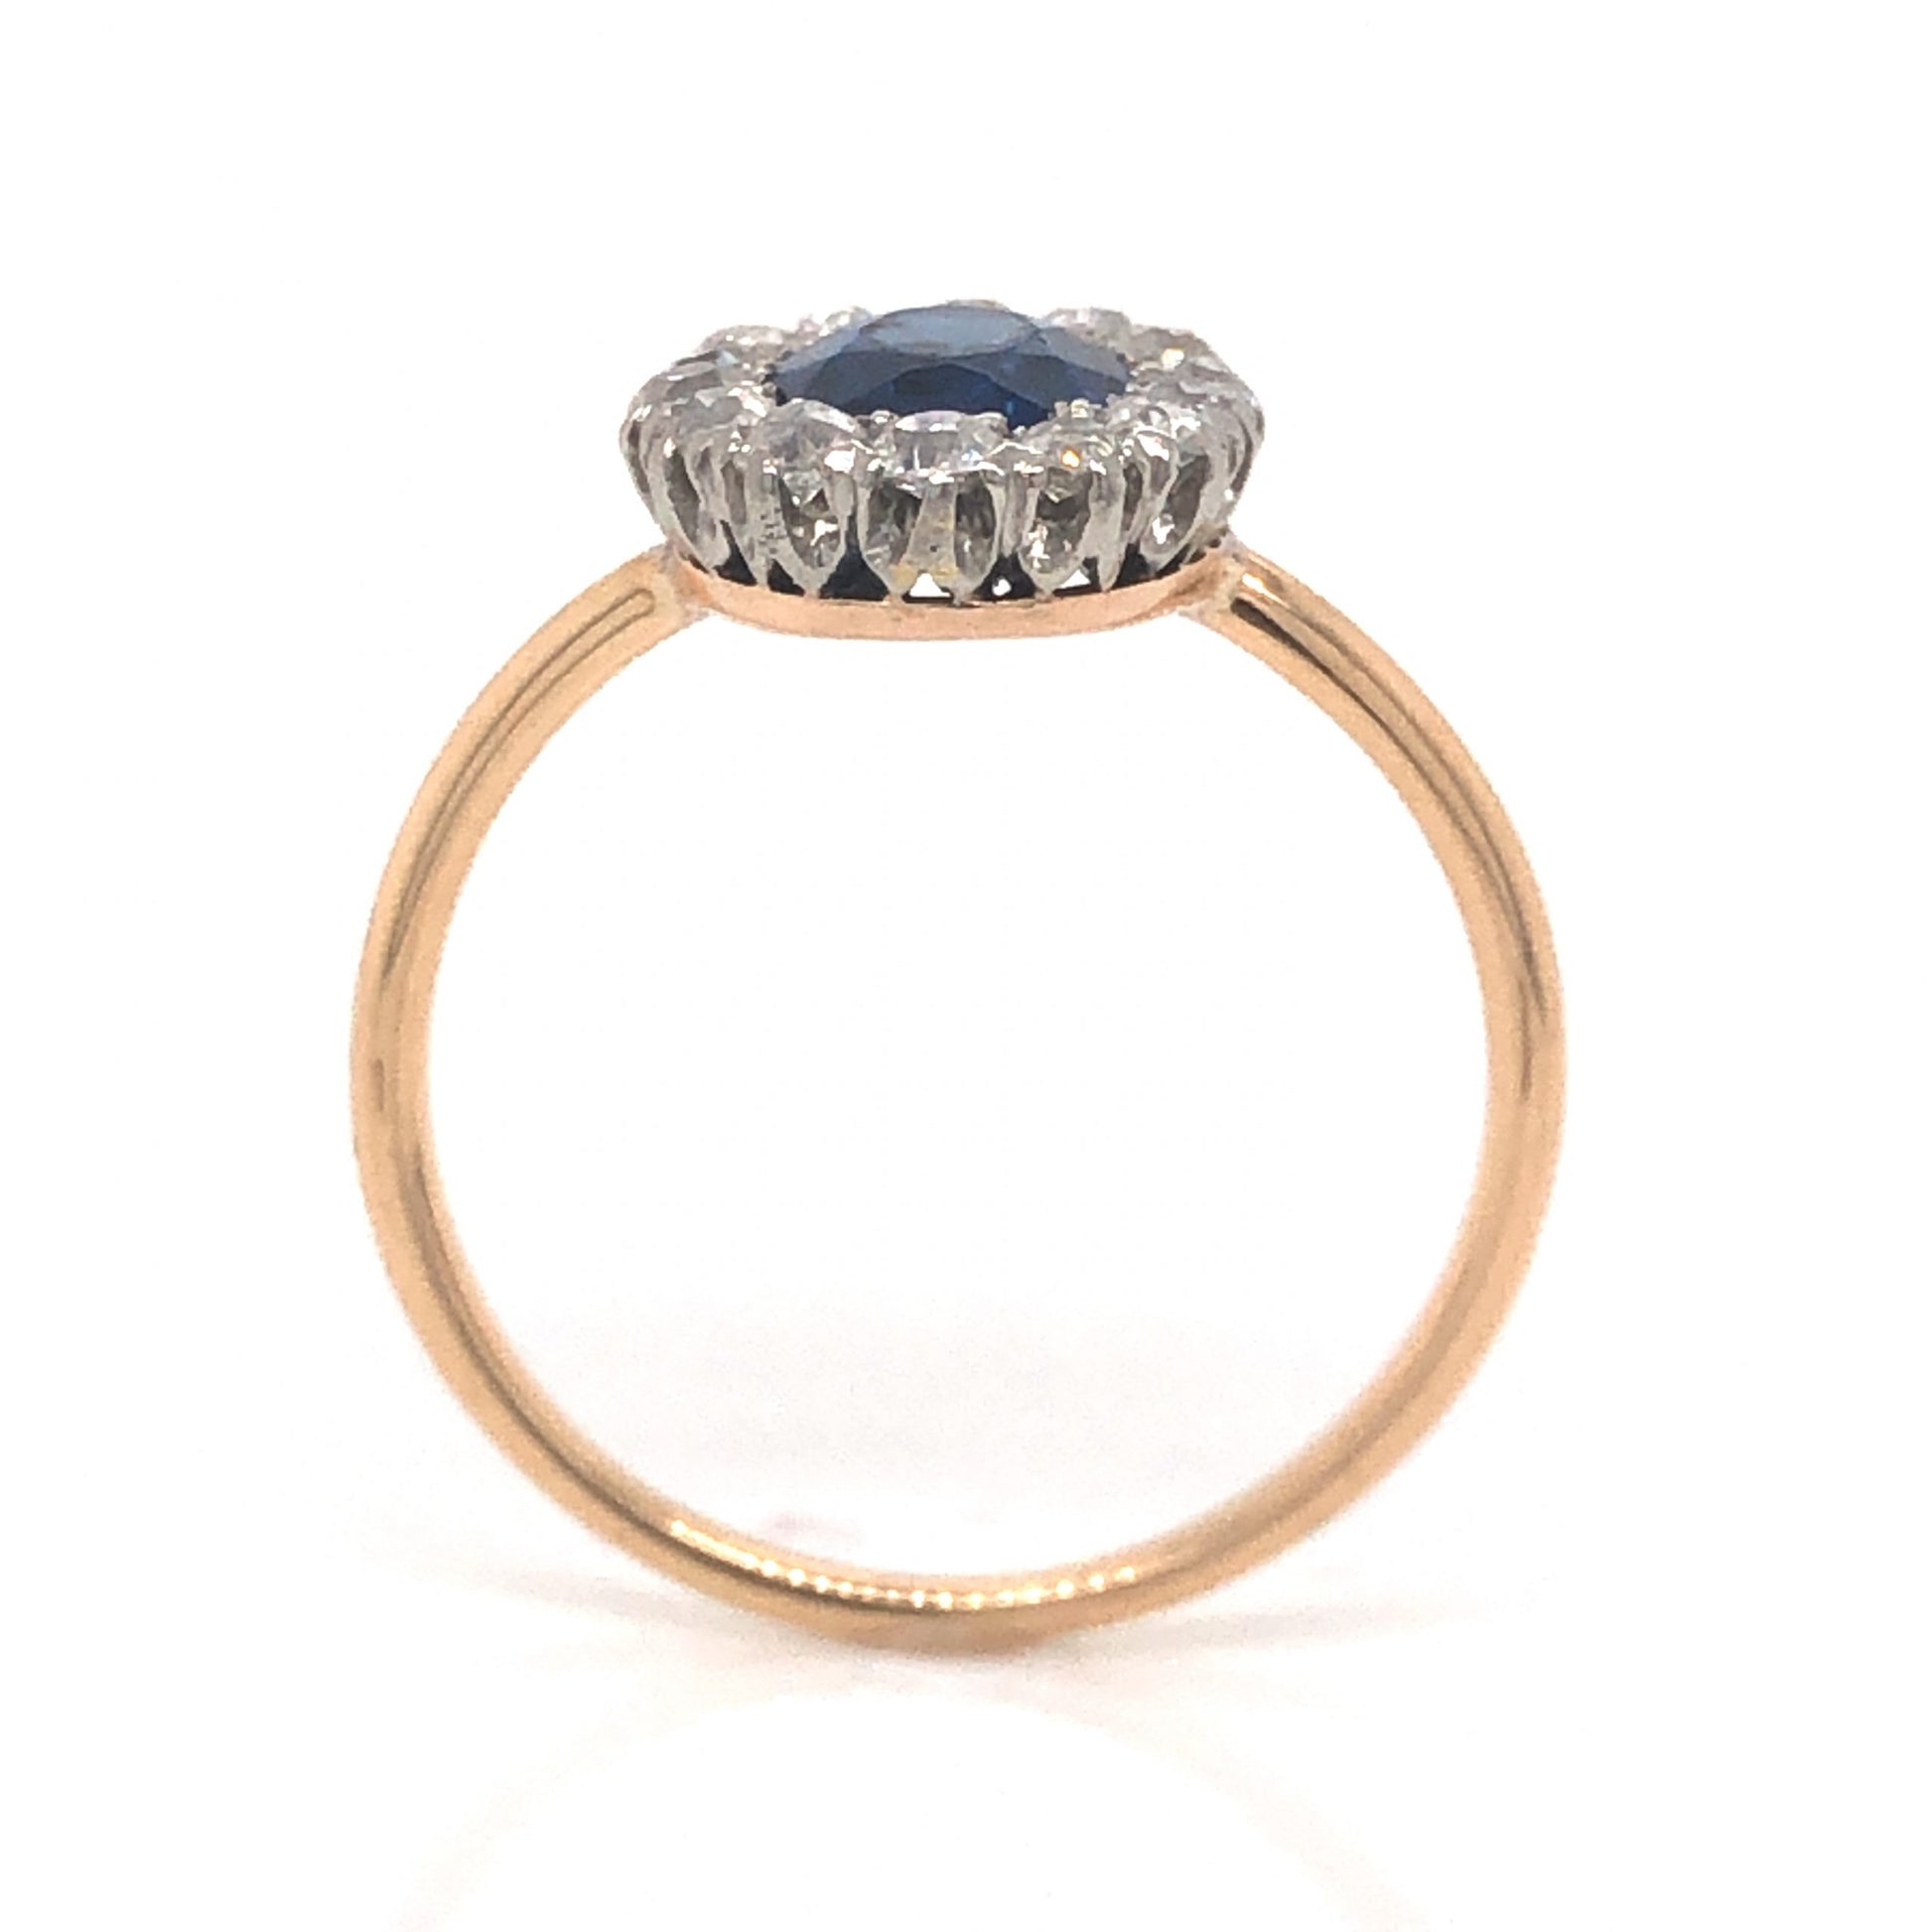 Victorian Oval Cut Sapphire & Diamond Ring in 14k Gold & PlatinumComposition: PlatinumRing Size: 6.25Total Diamond Weight: .56 ctTotal Gram Weight: 2.8 g